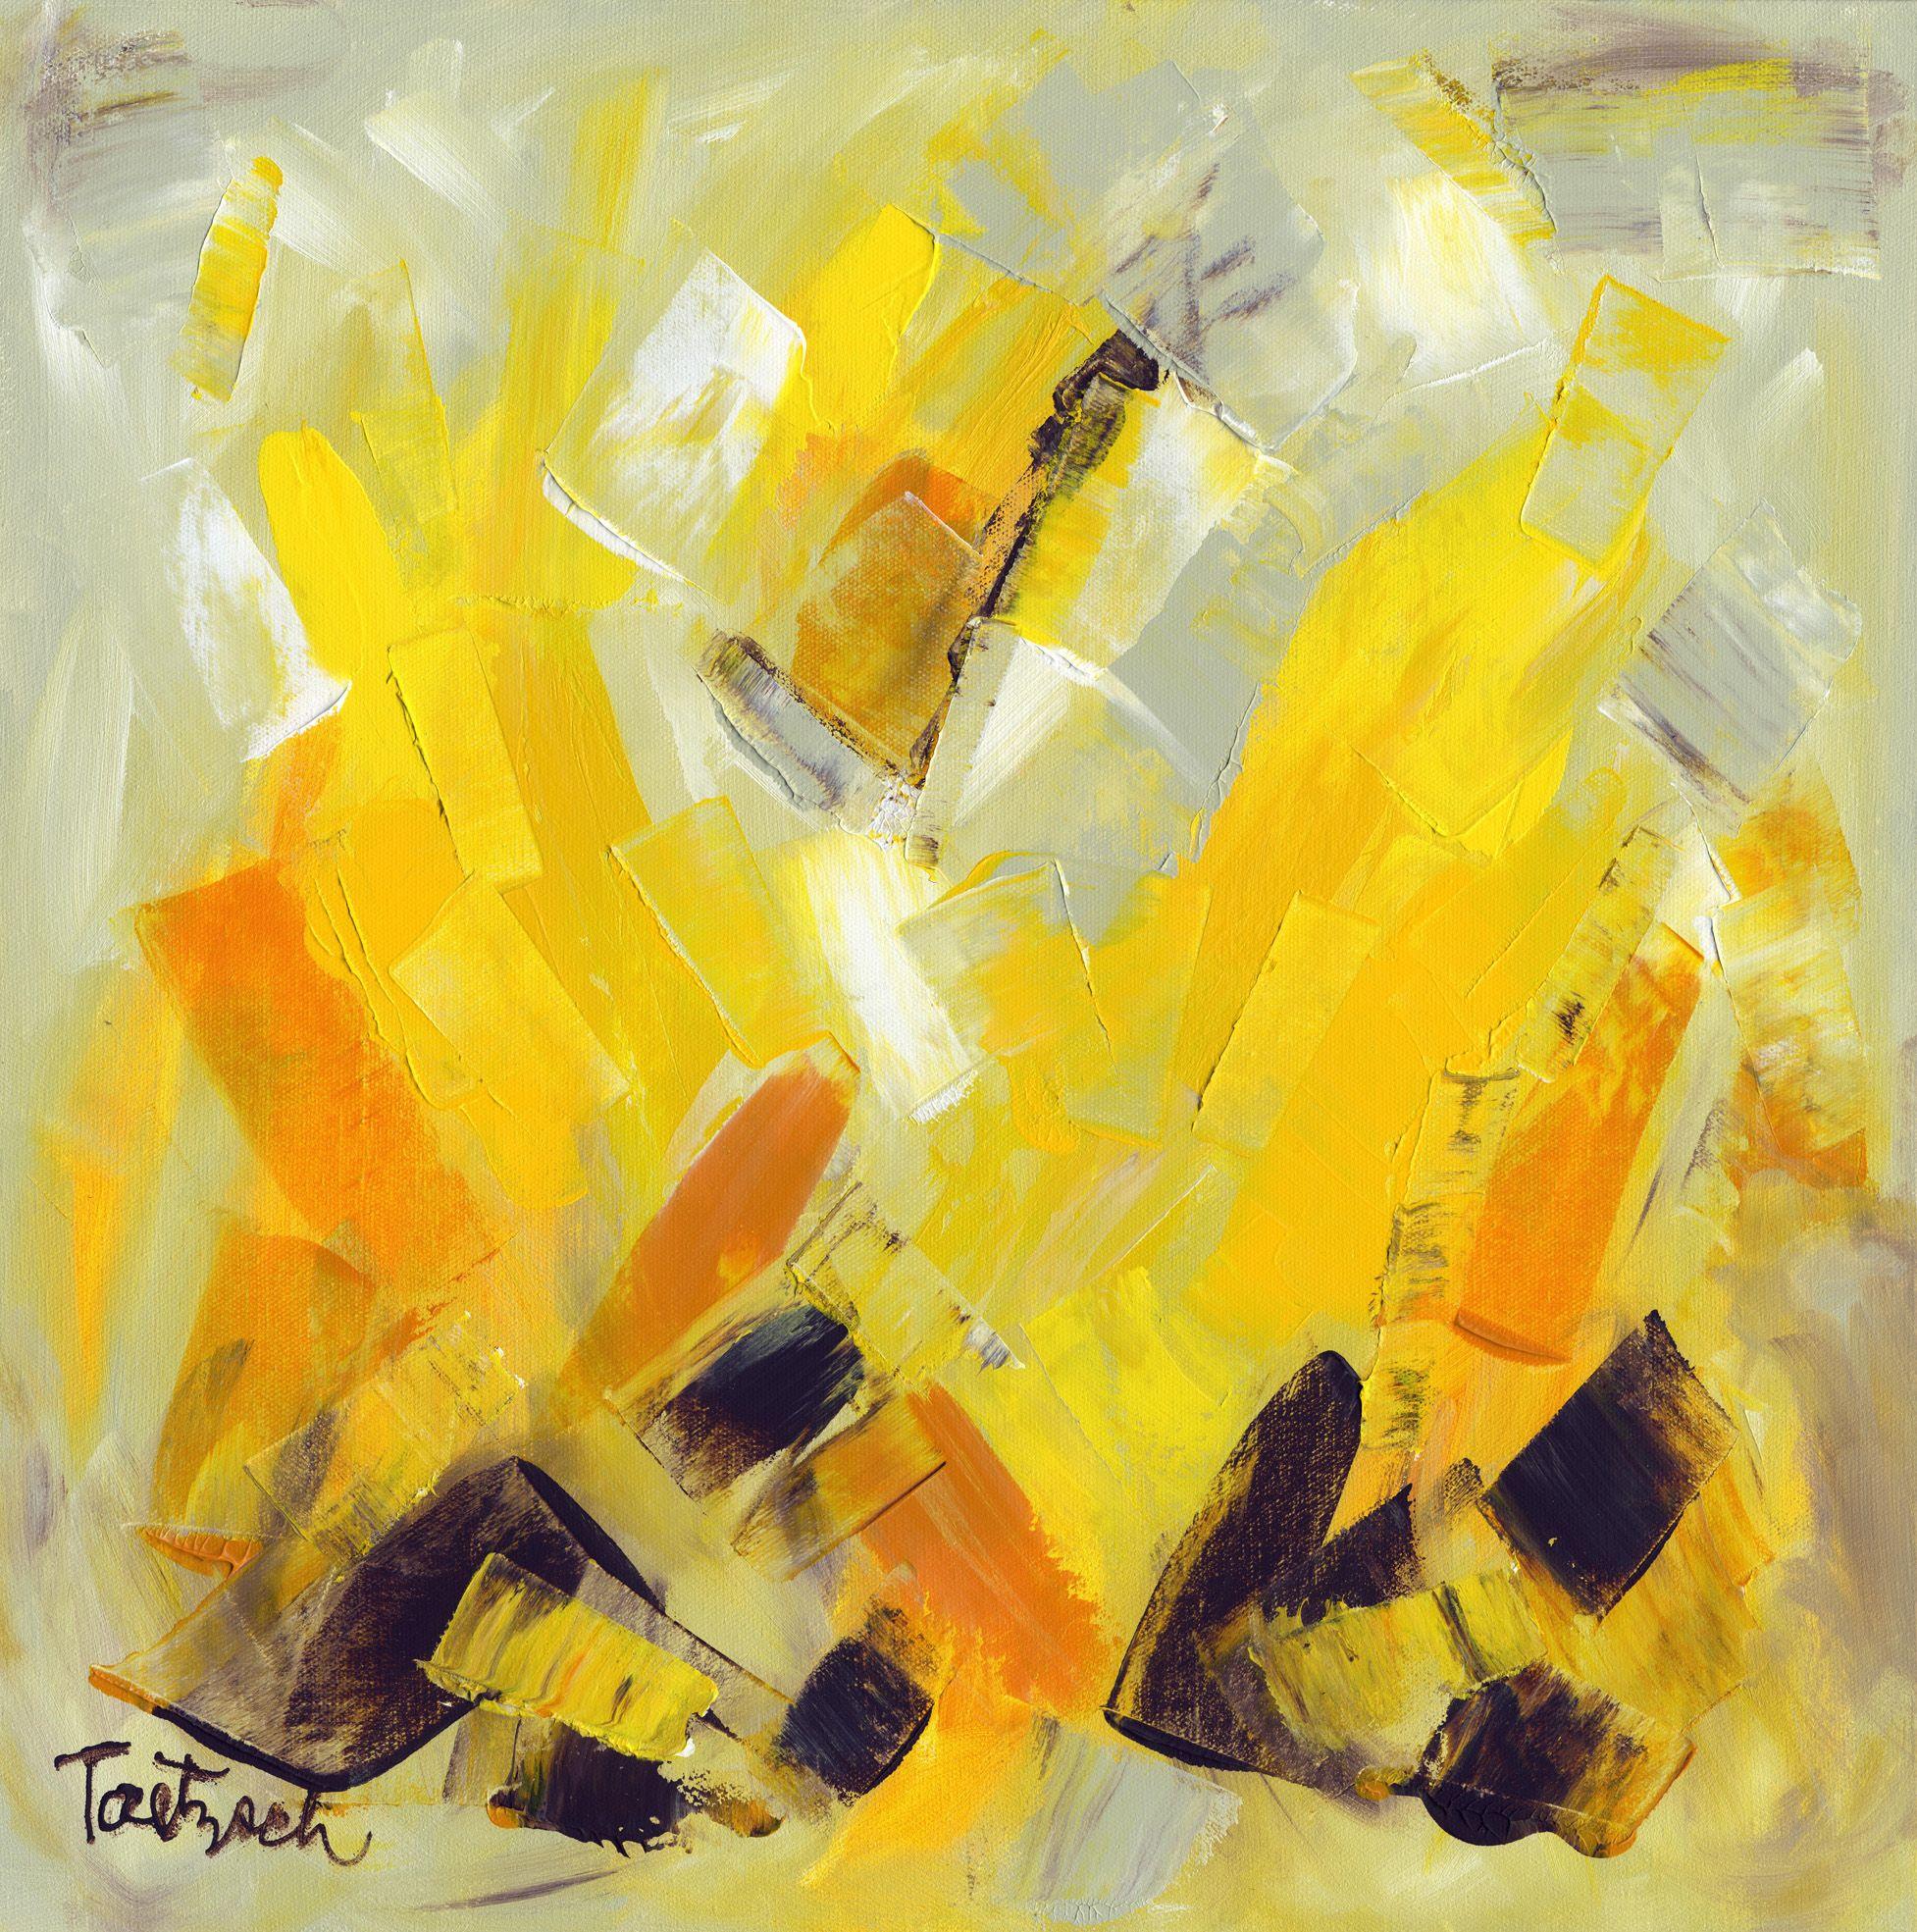 20" x 20" x 1.5"  original painting on stretched canvas, with the image continuing around the 1.5" sides so that no frame is required.  It comes wired,  ready to hang.     Lift your spirits with sun-kissed golden yellow.  This abstract expressionist